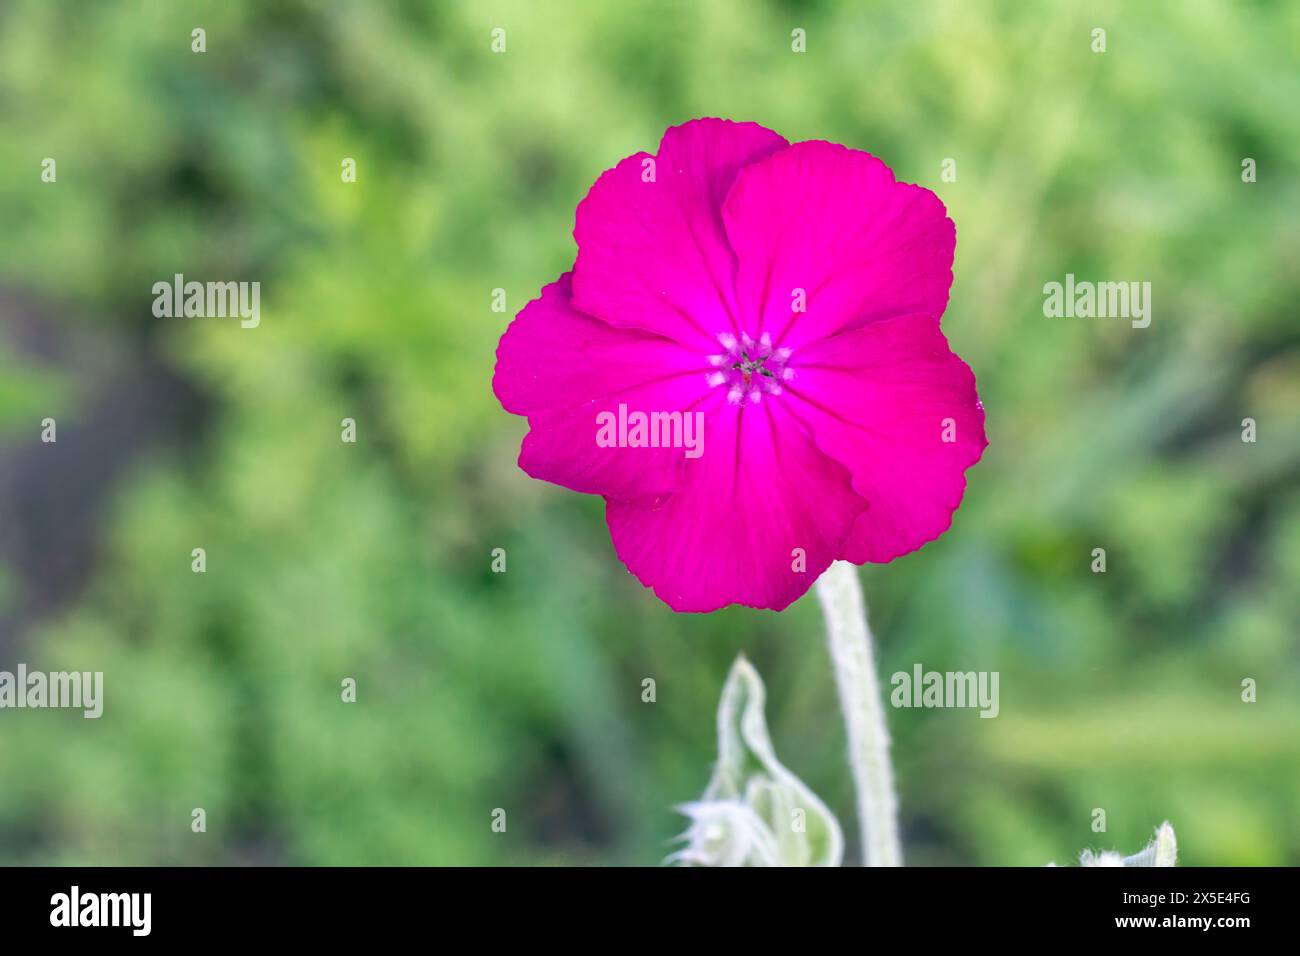 Close-up a flower Silene coronaria or Lychnis coronaria with blurred natural background. Flowering plants in the garden. Stock Photo